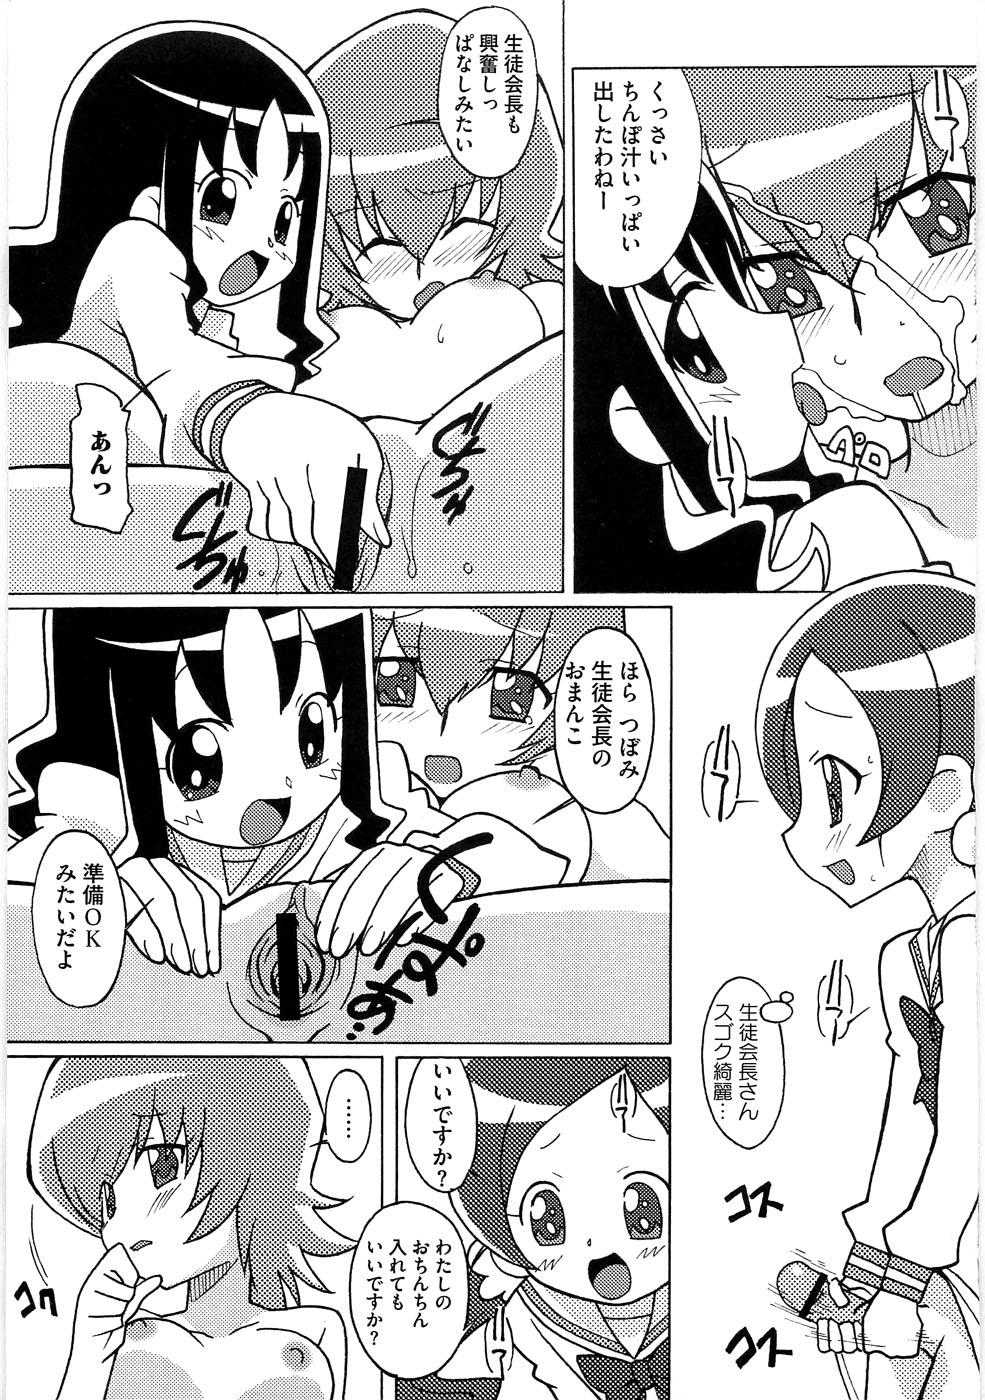 Free Blowjob Magejun 26 - Heartcatch precure Squirt - Page 11